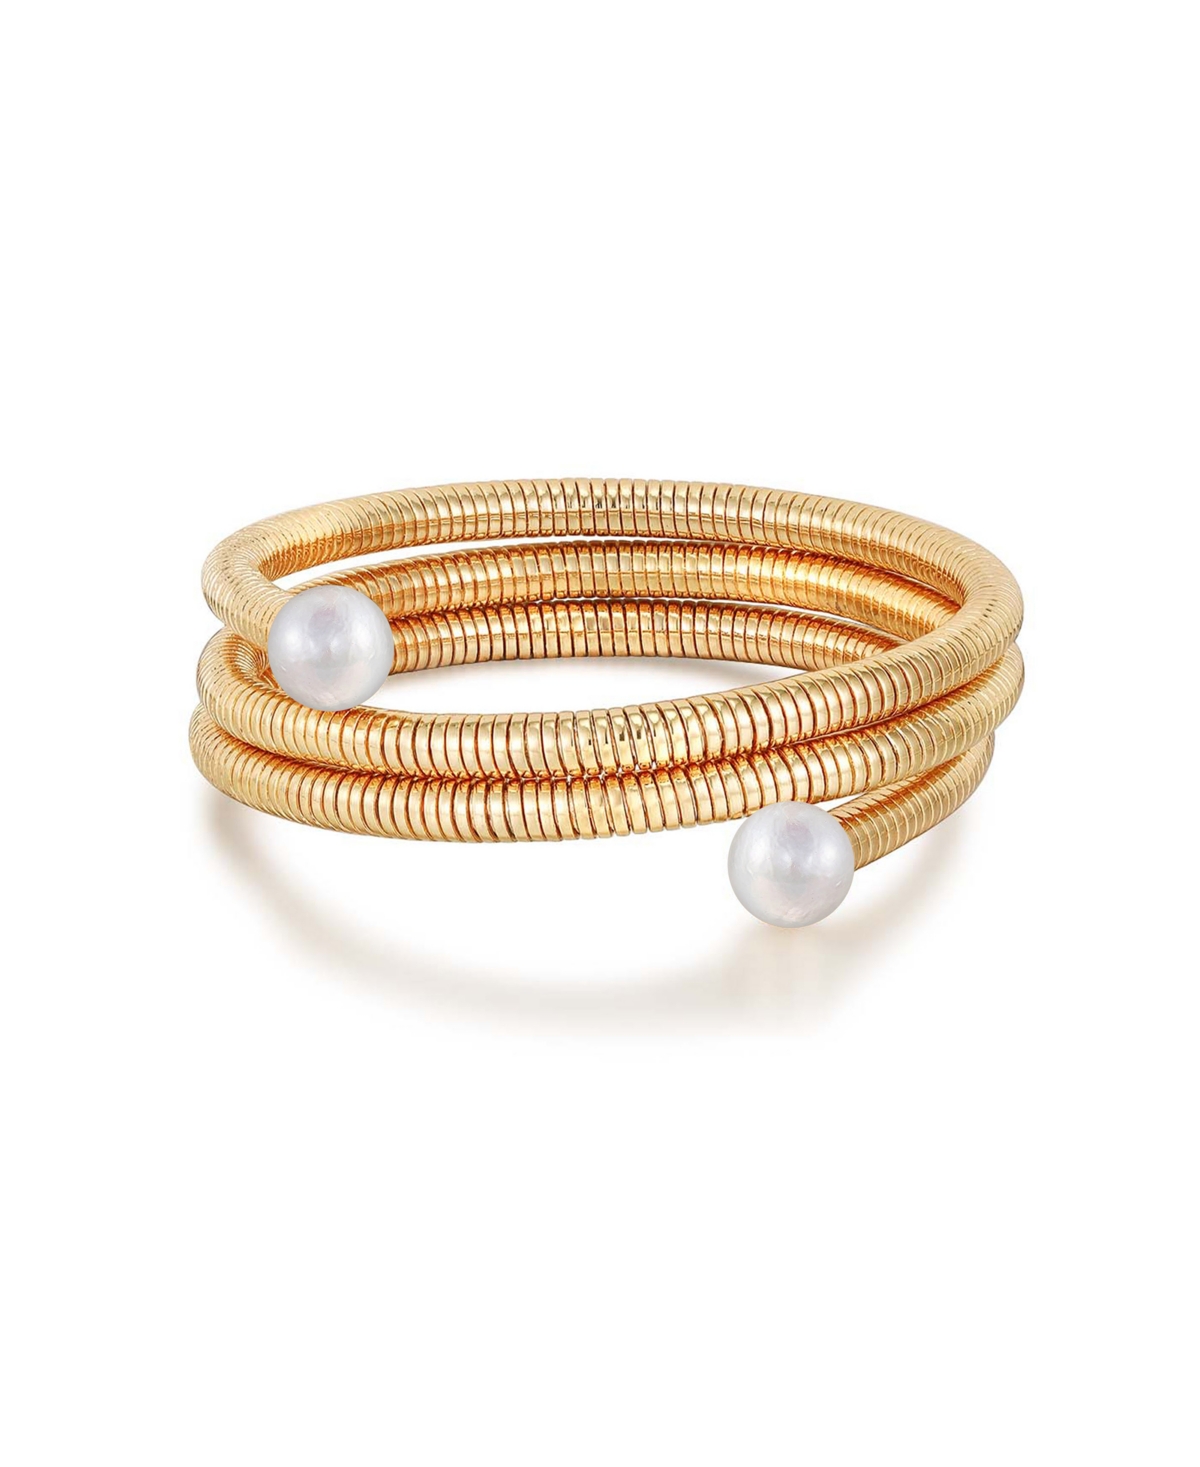 Cultivated Pearl Spring Band Flex 18k Gold Plated Cuff Bracelet - White